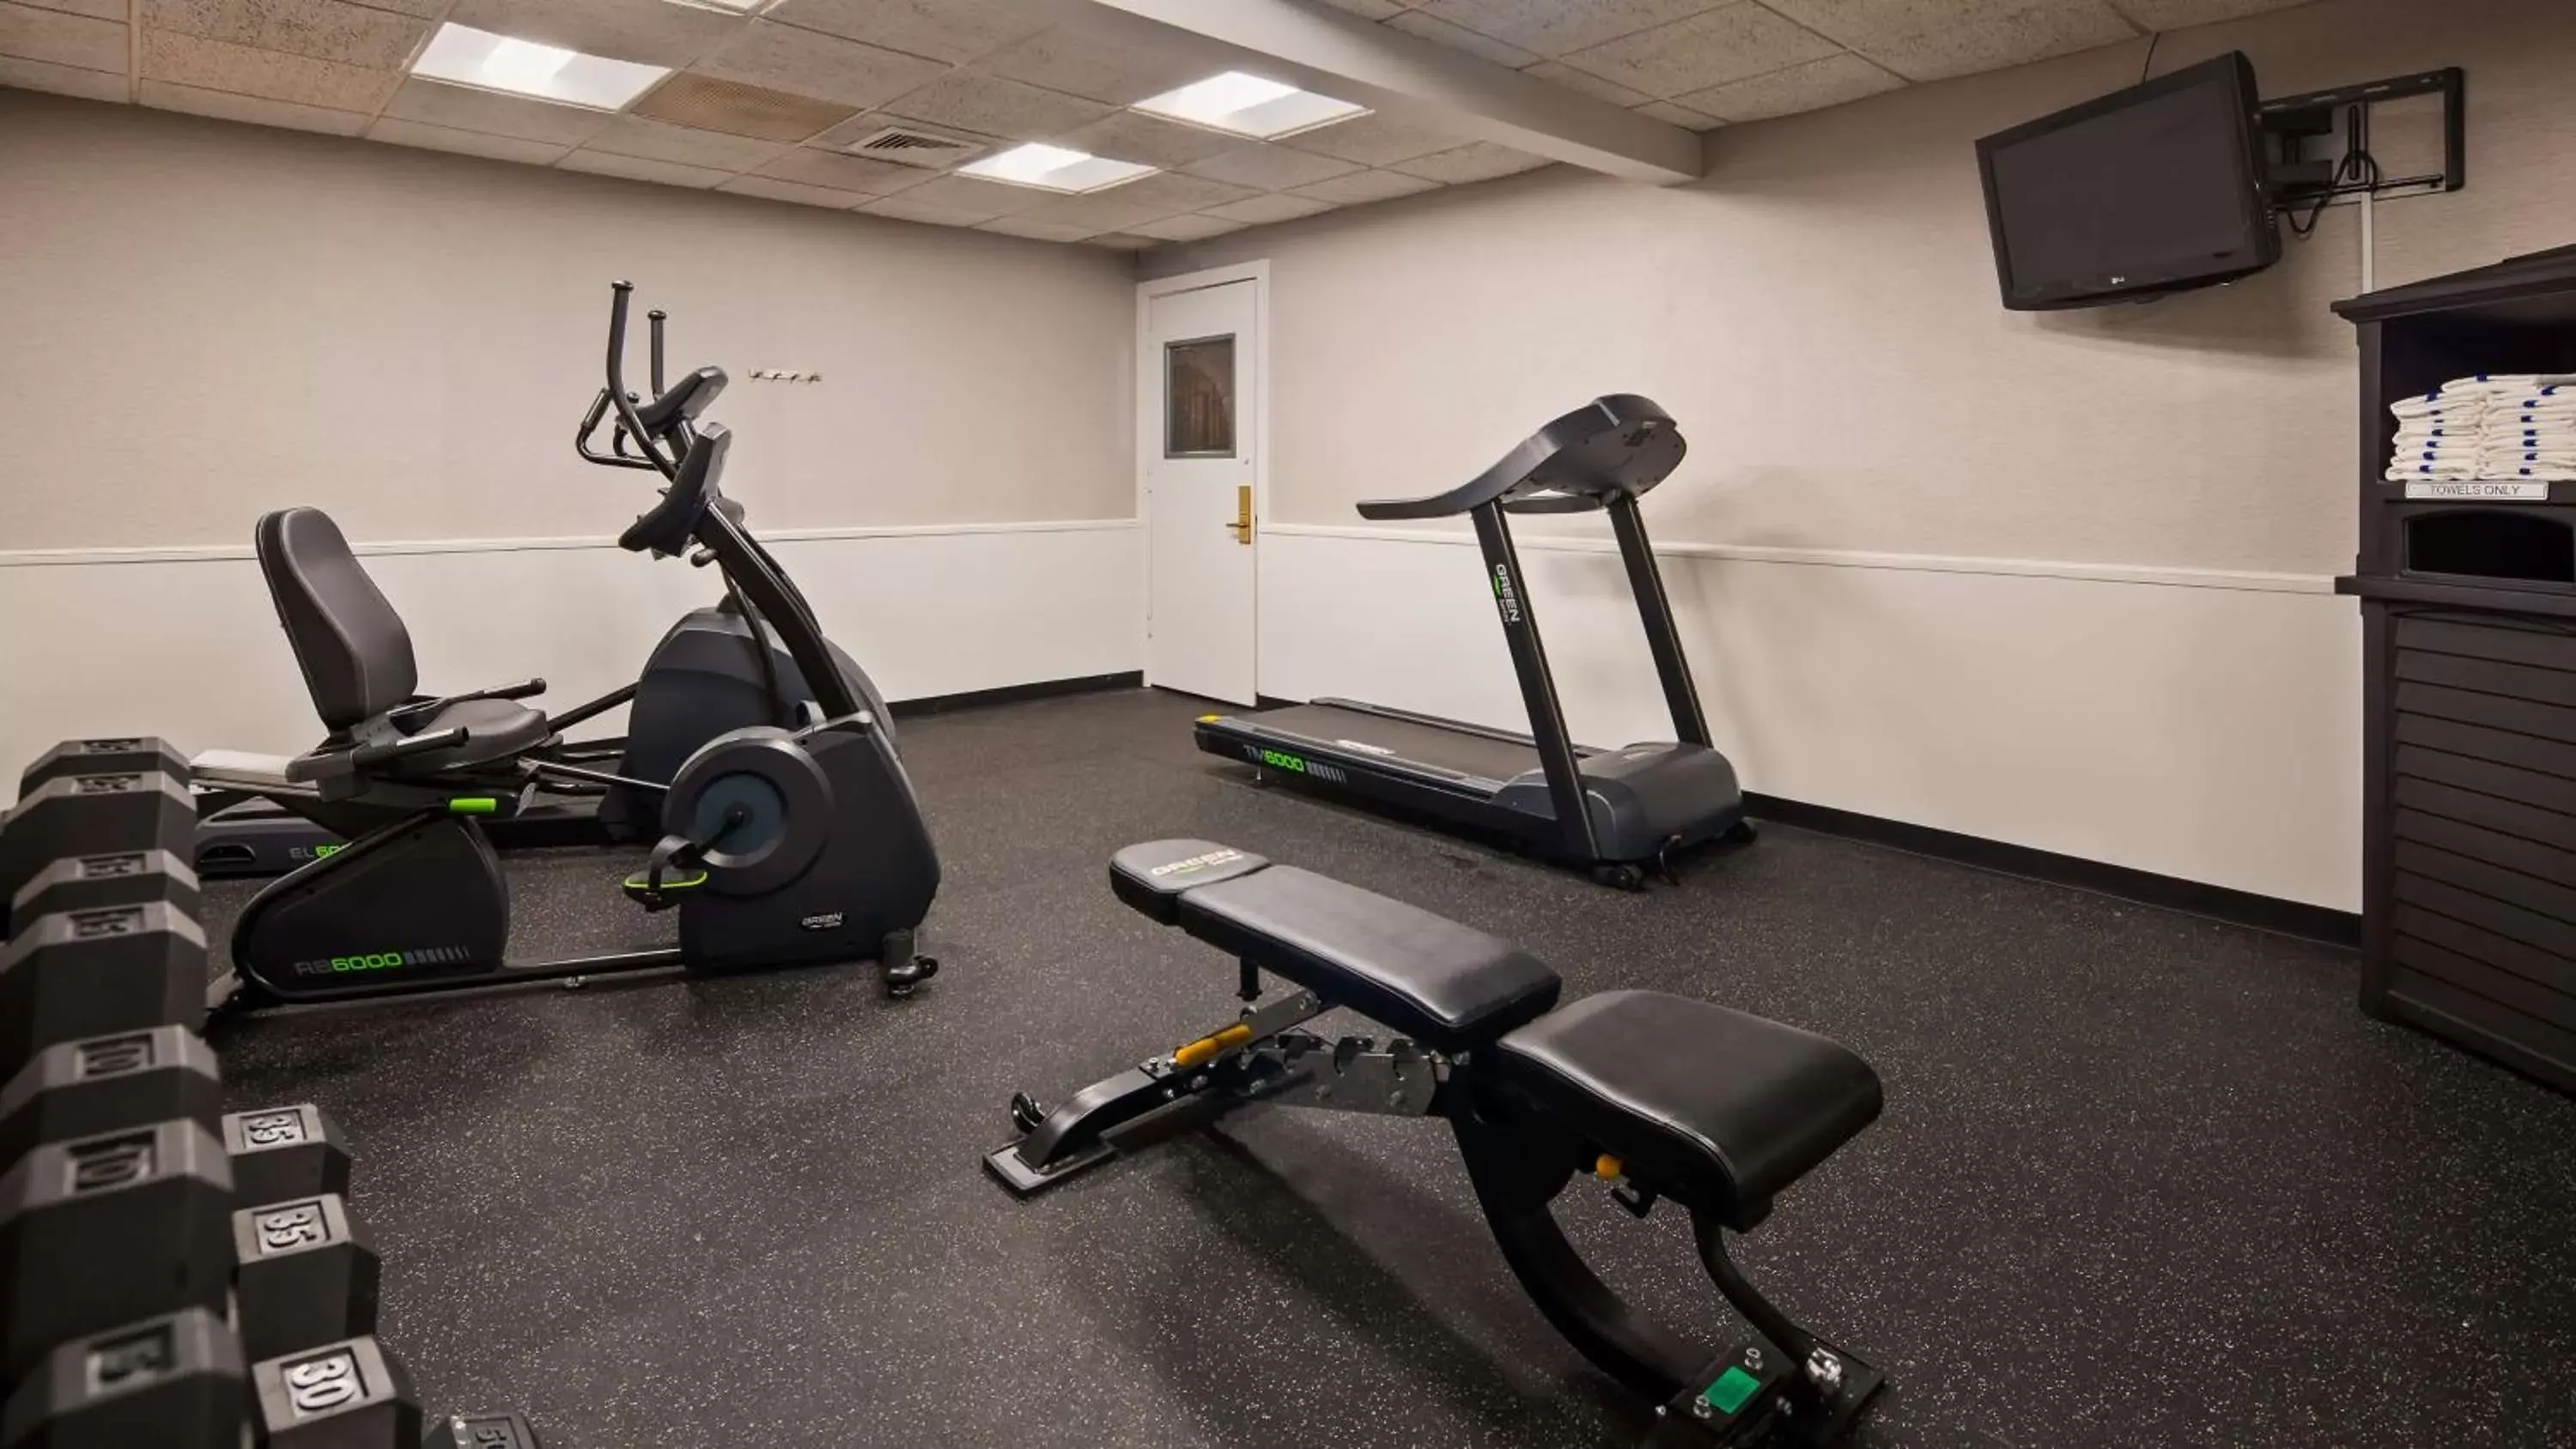 Fitness centre/facilities, Fitness Center/Facilities in Best Western Woodhaven Inn